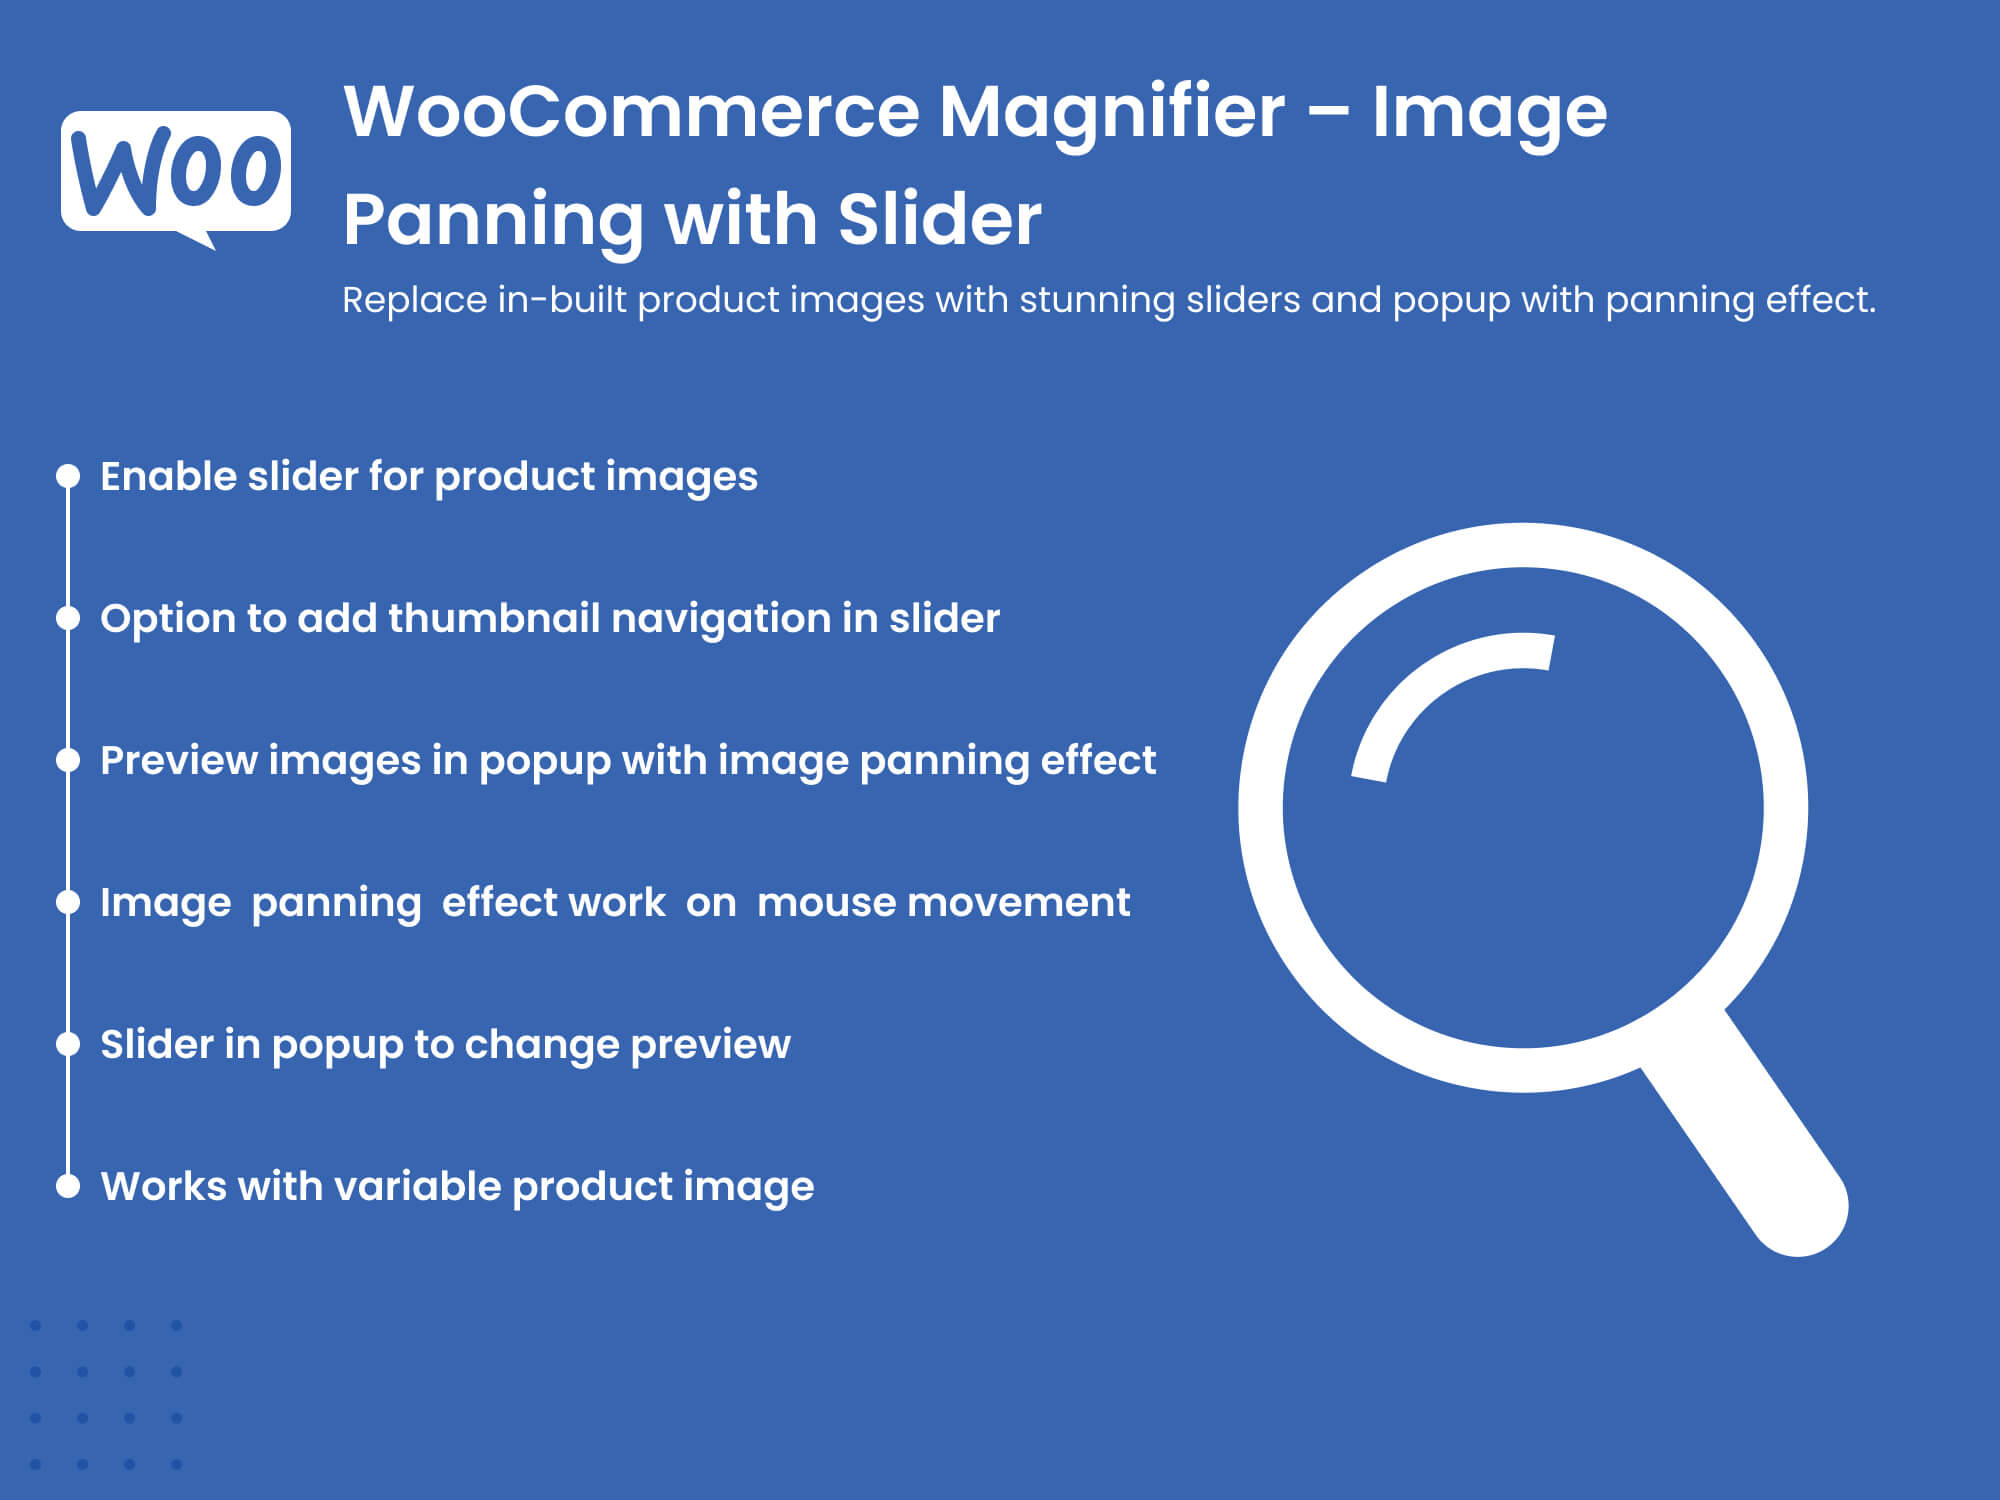 WooCommerce Magnifier – Image Panning with Slider